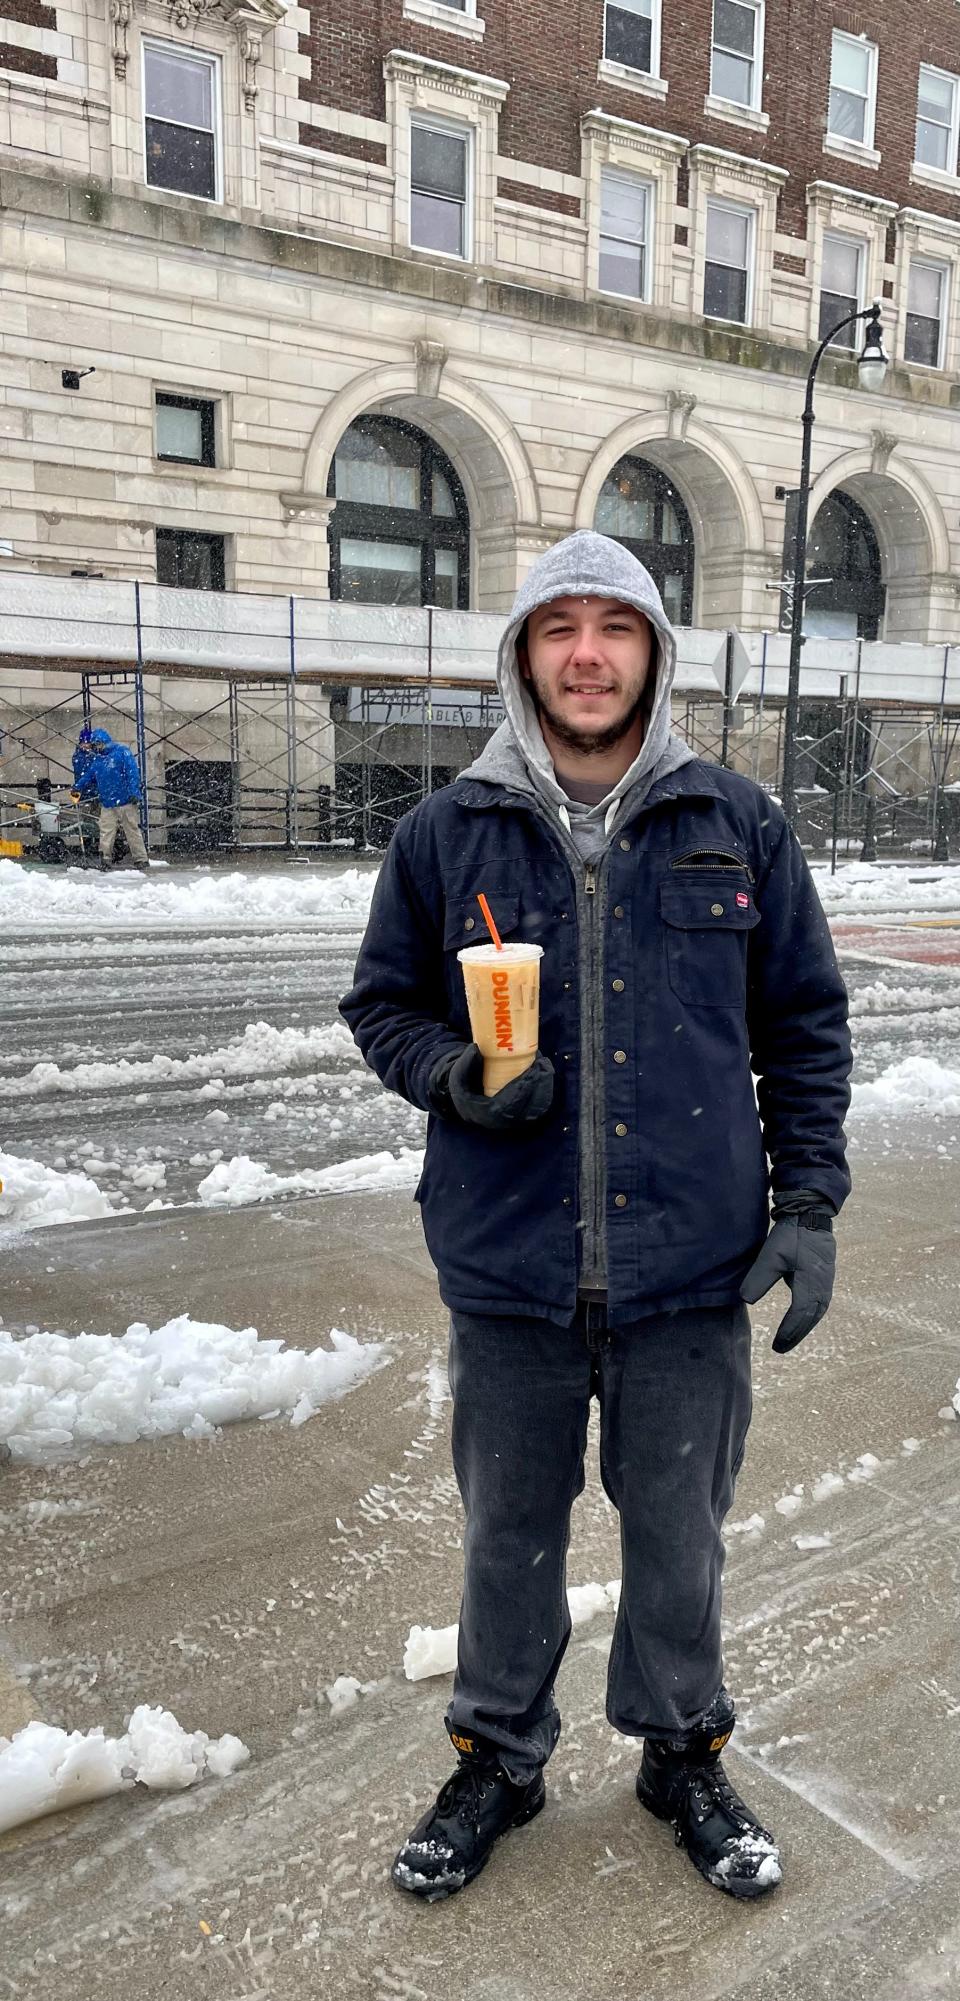 Rich Carter with his daily iced coffee he buys every morning, regardless of weather conditions.